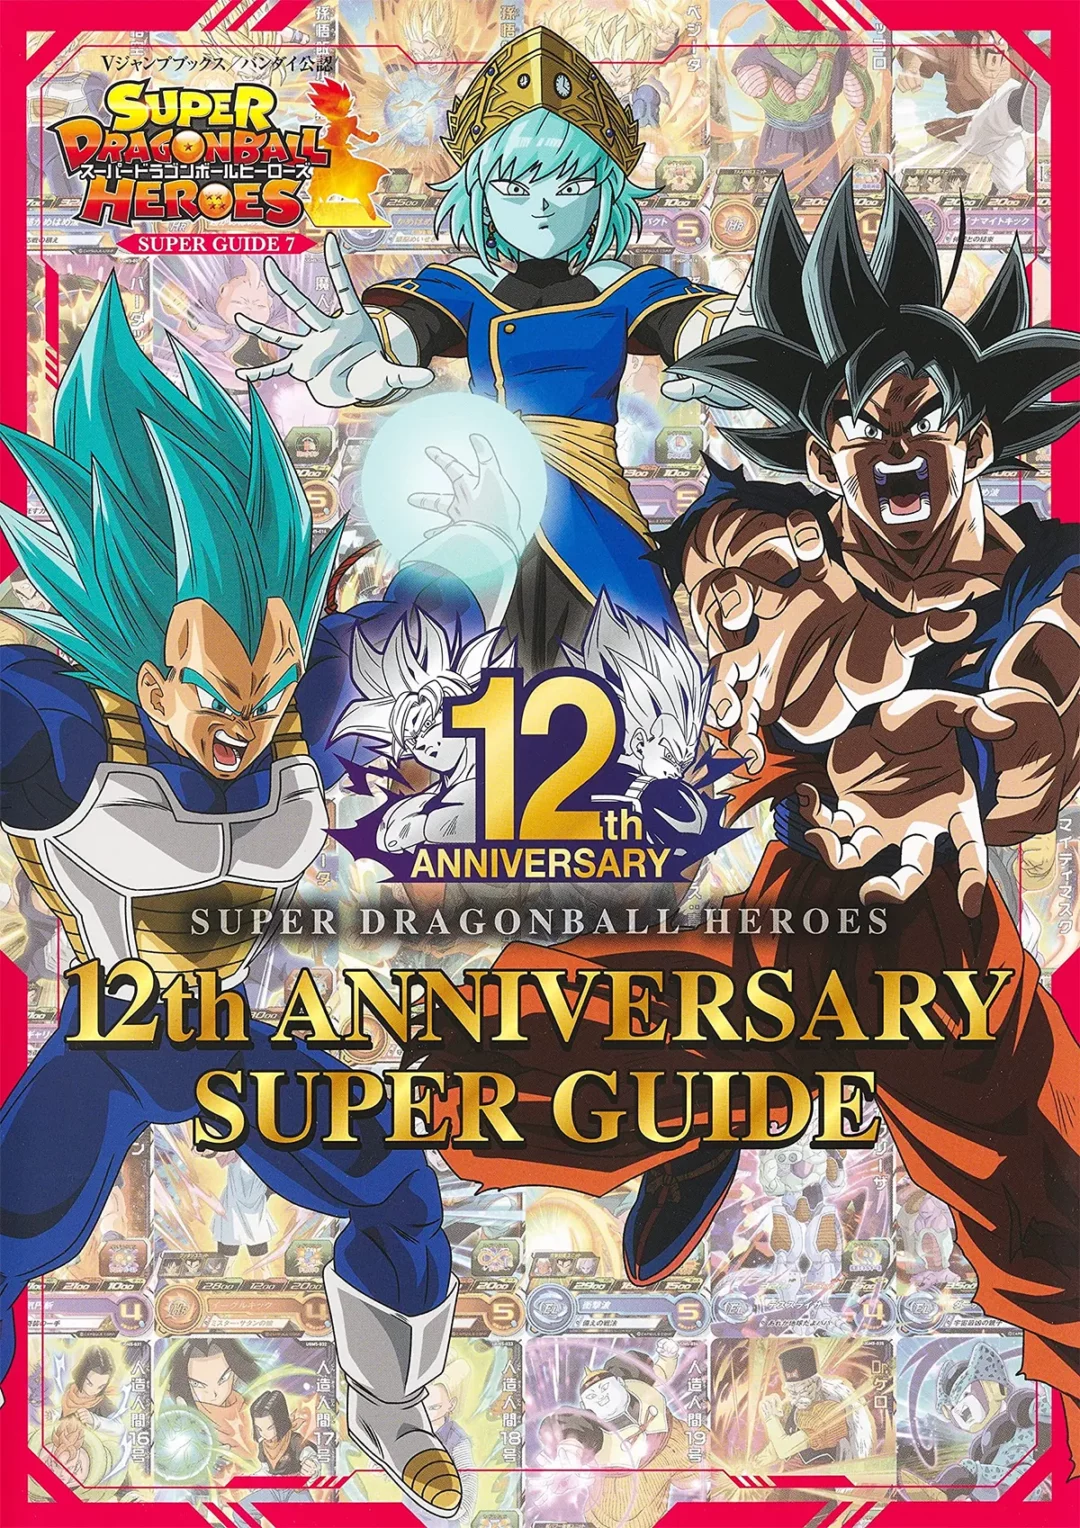 Super-Dragon-Ball-Heroes-12th-Anniversary-Guide-Cover